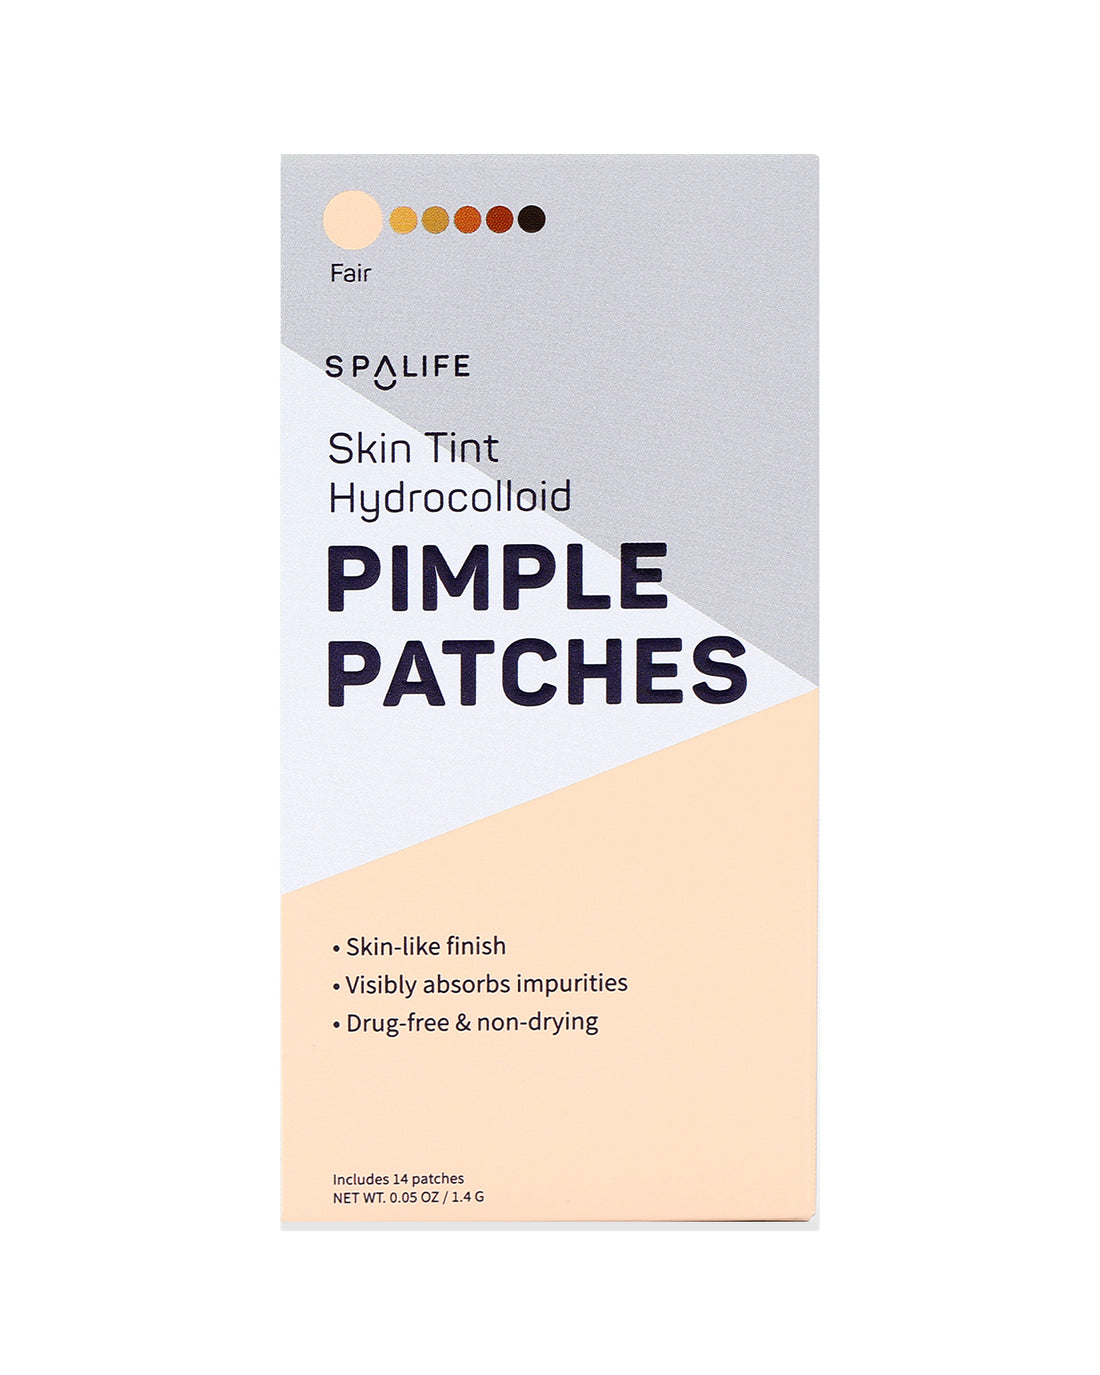 Skin_tint_pimple_patches_packe-629